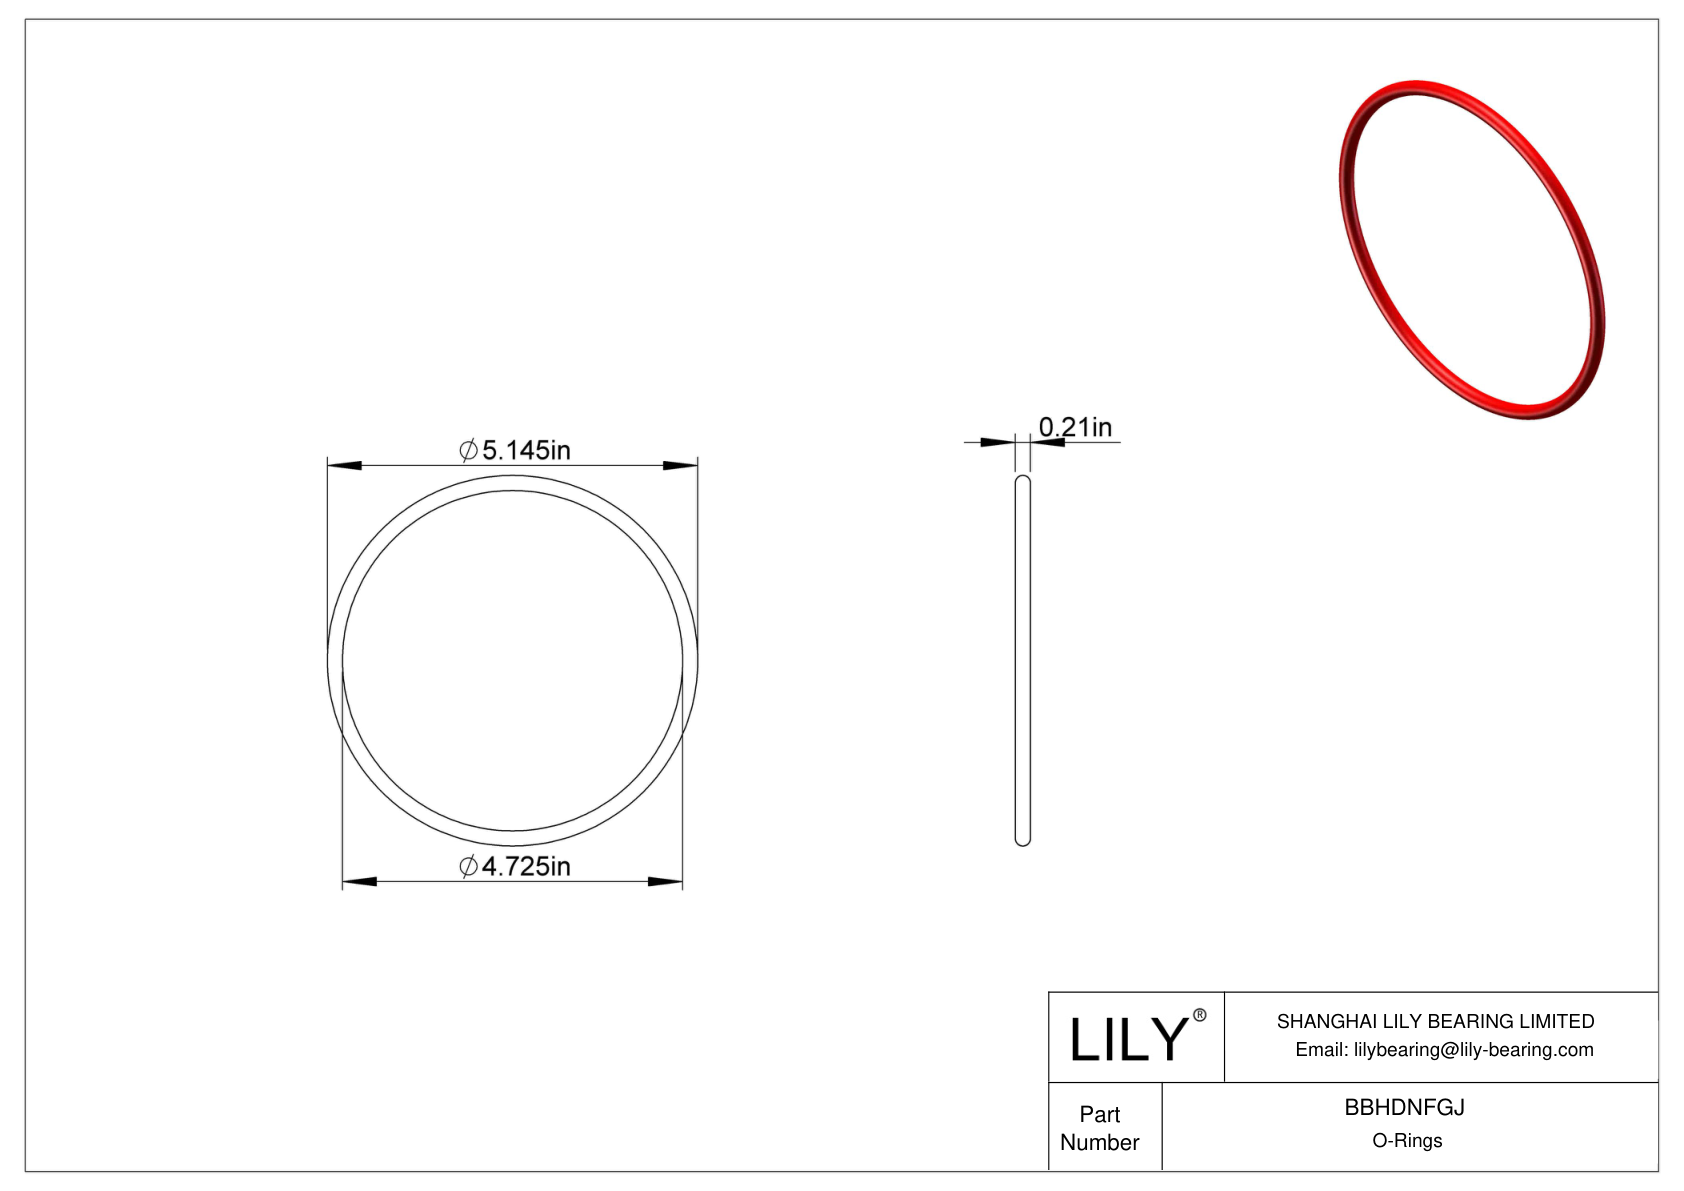 BBHDNFGJ High Temperature O-Rings Round cad drawing